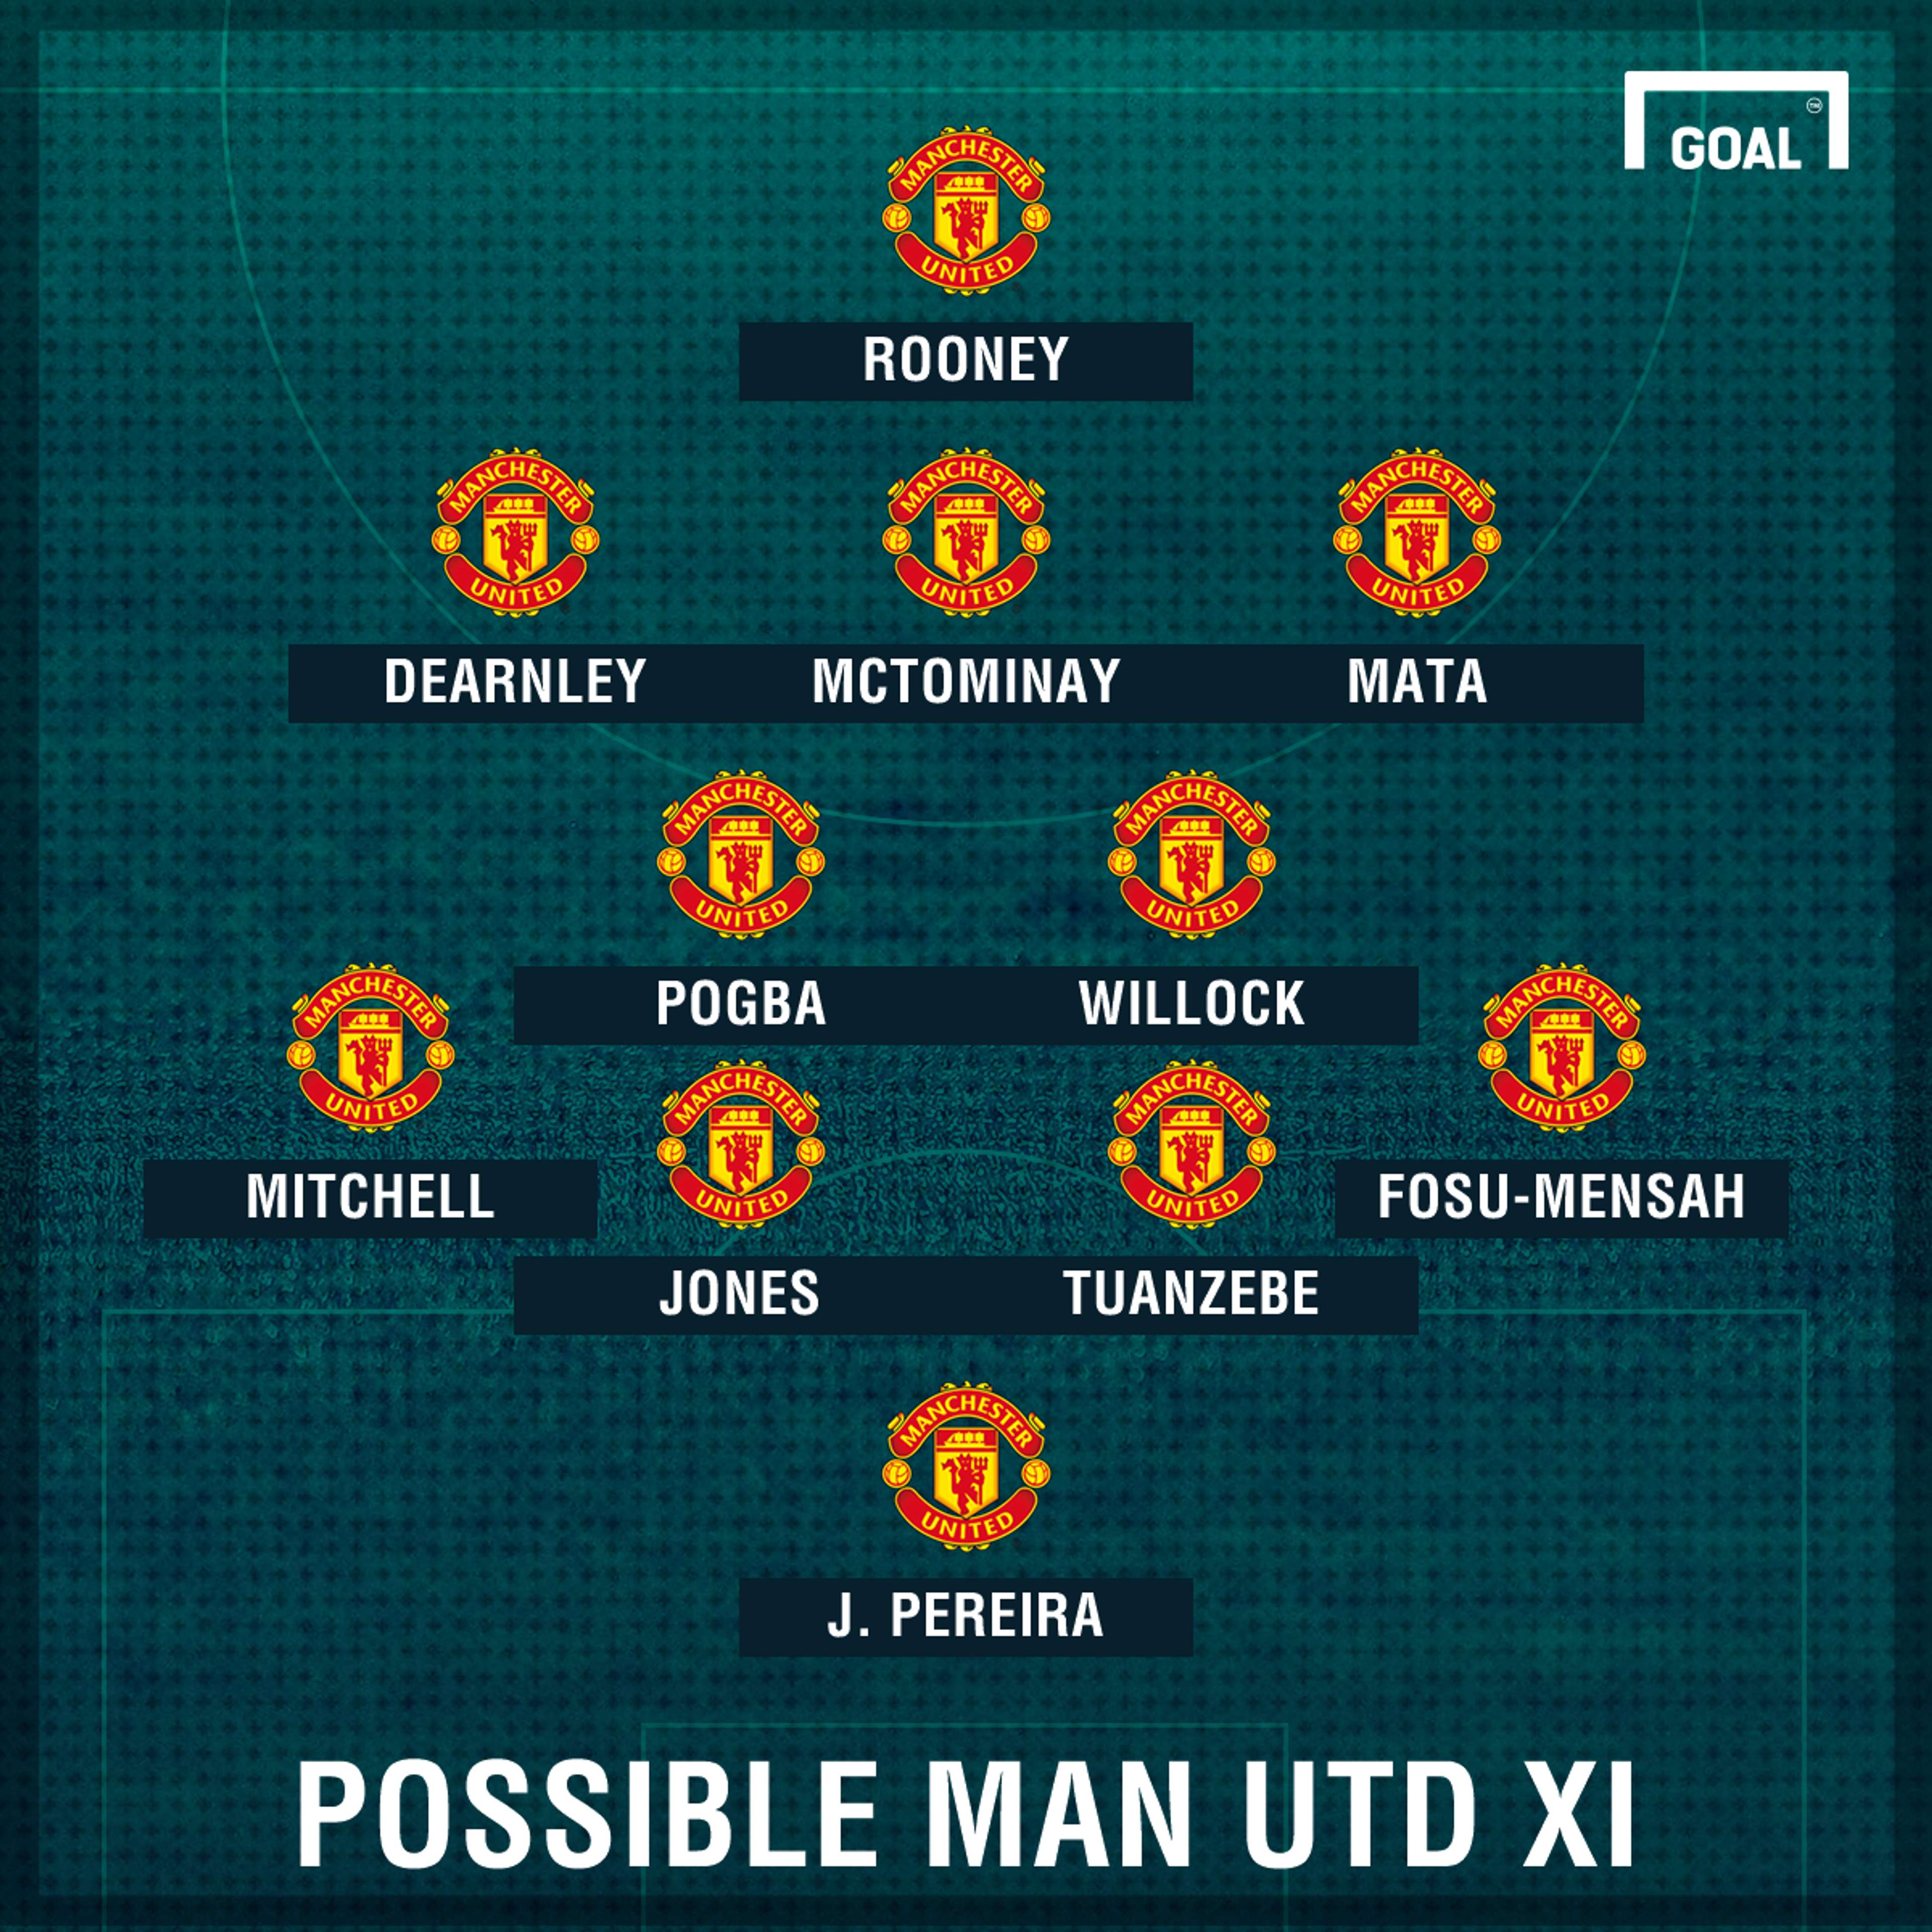 Possible Man Utd XI for Palace